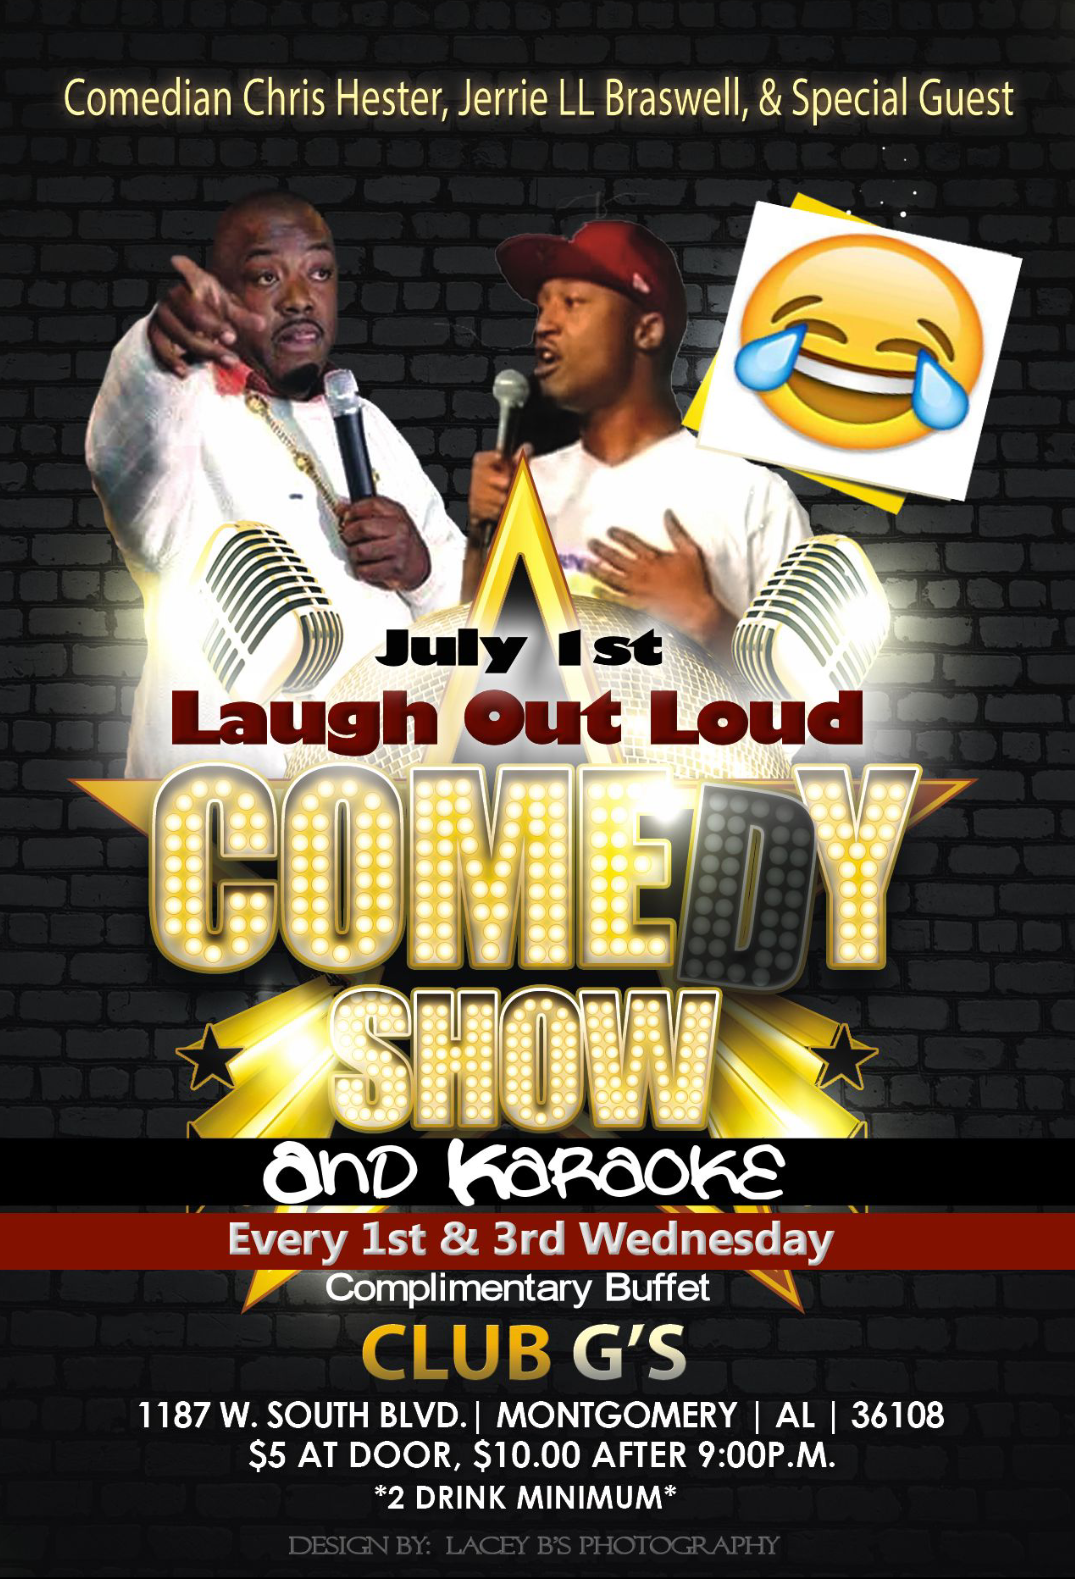 Laugh out loud Wednesday inMontgomery